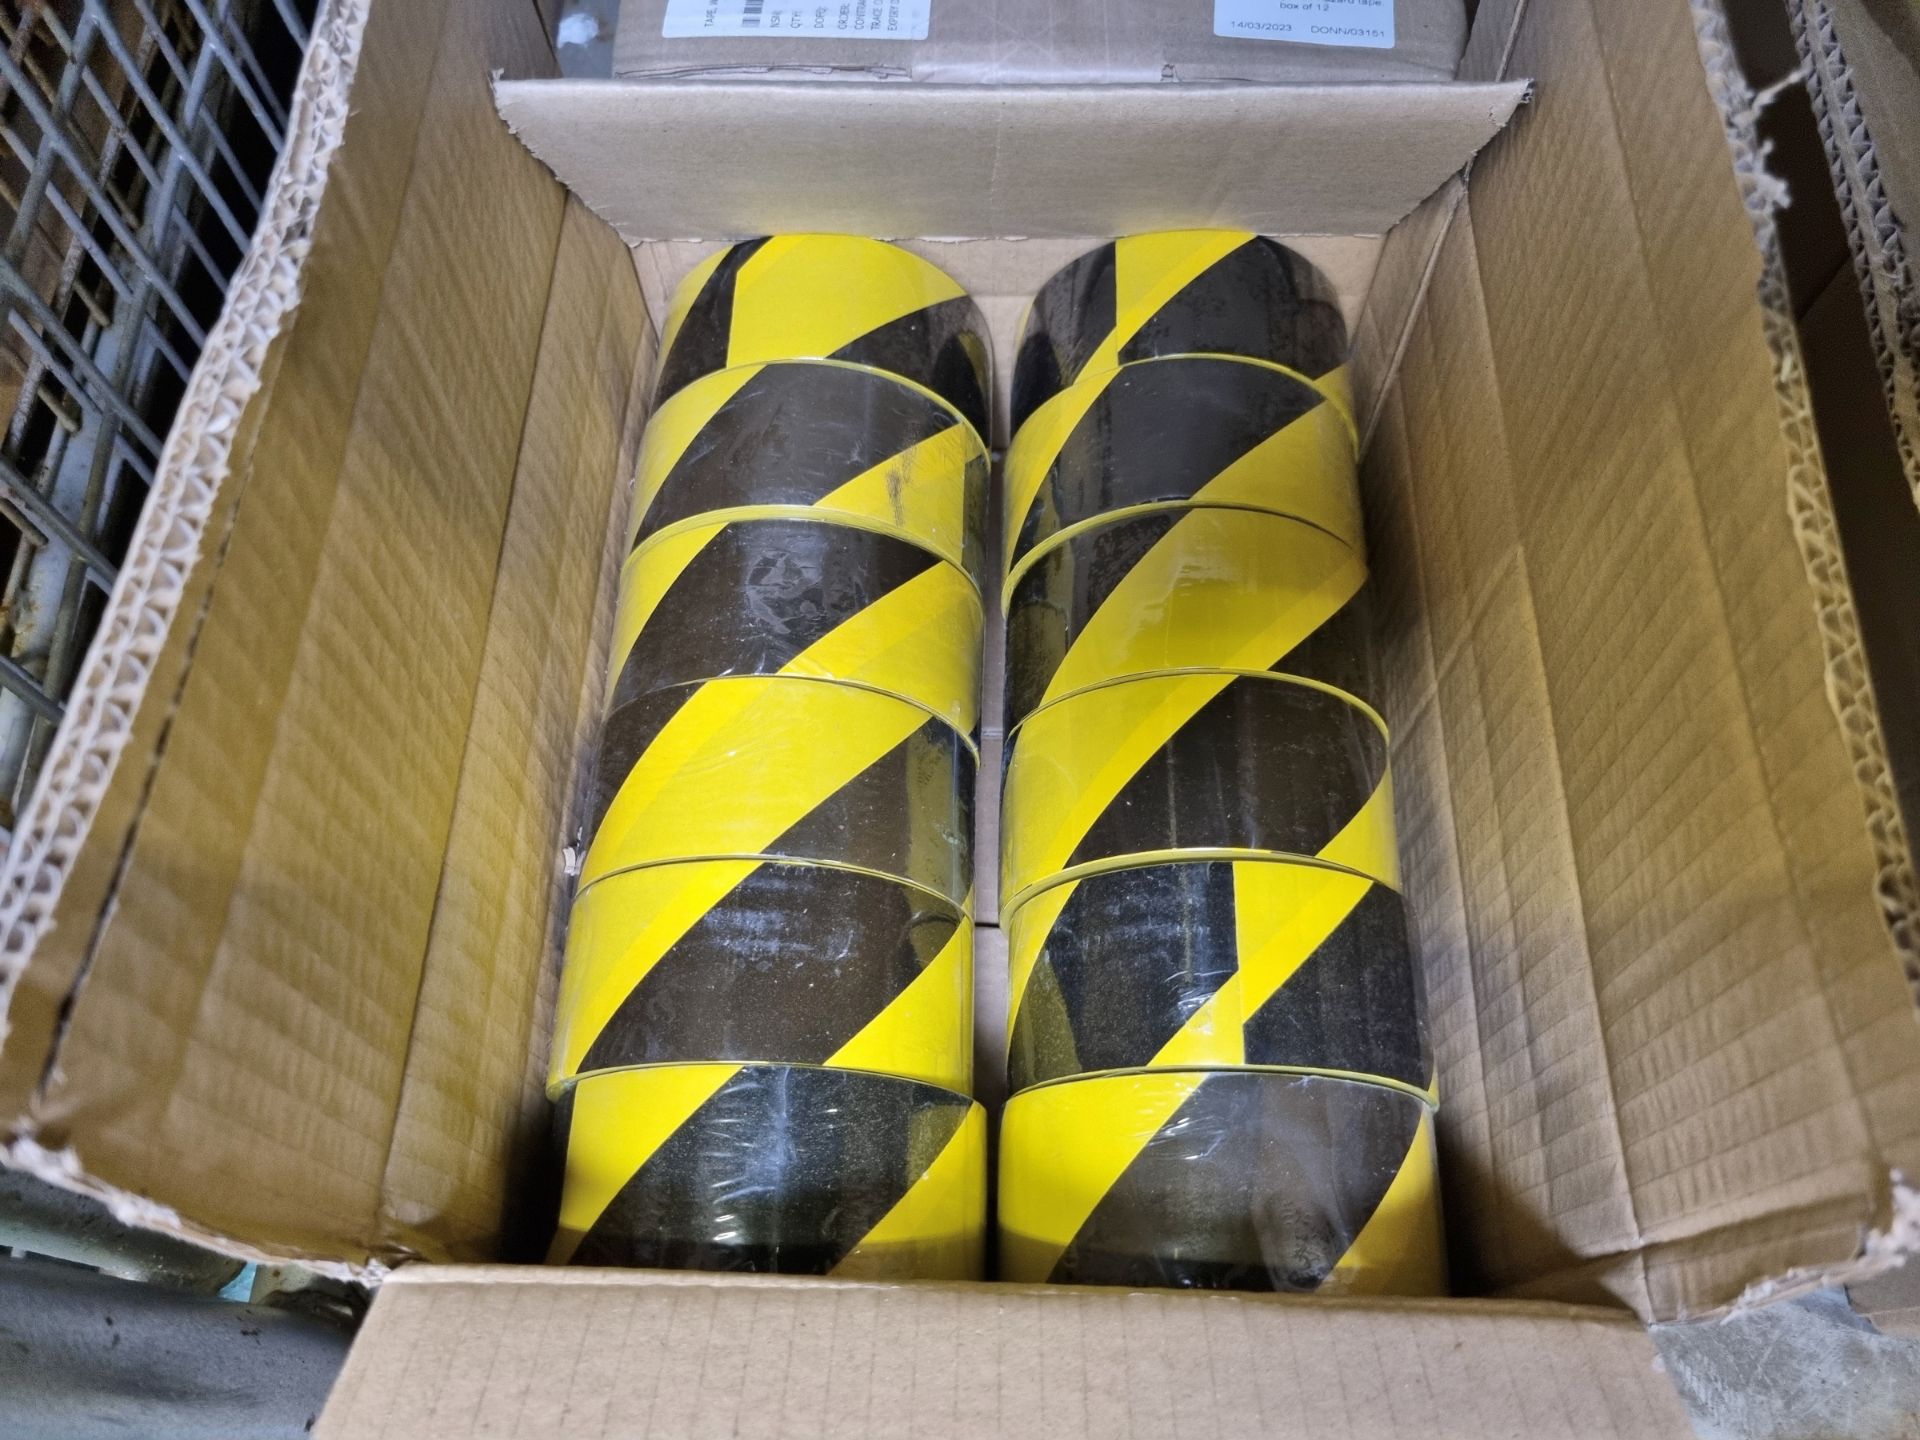 3x boxes of Black and yellow hazard tape - 12 rolls per box - Image 3 of 4